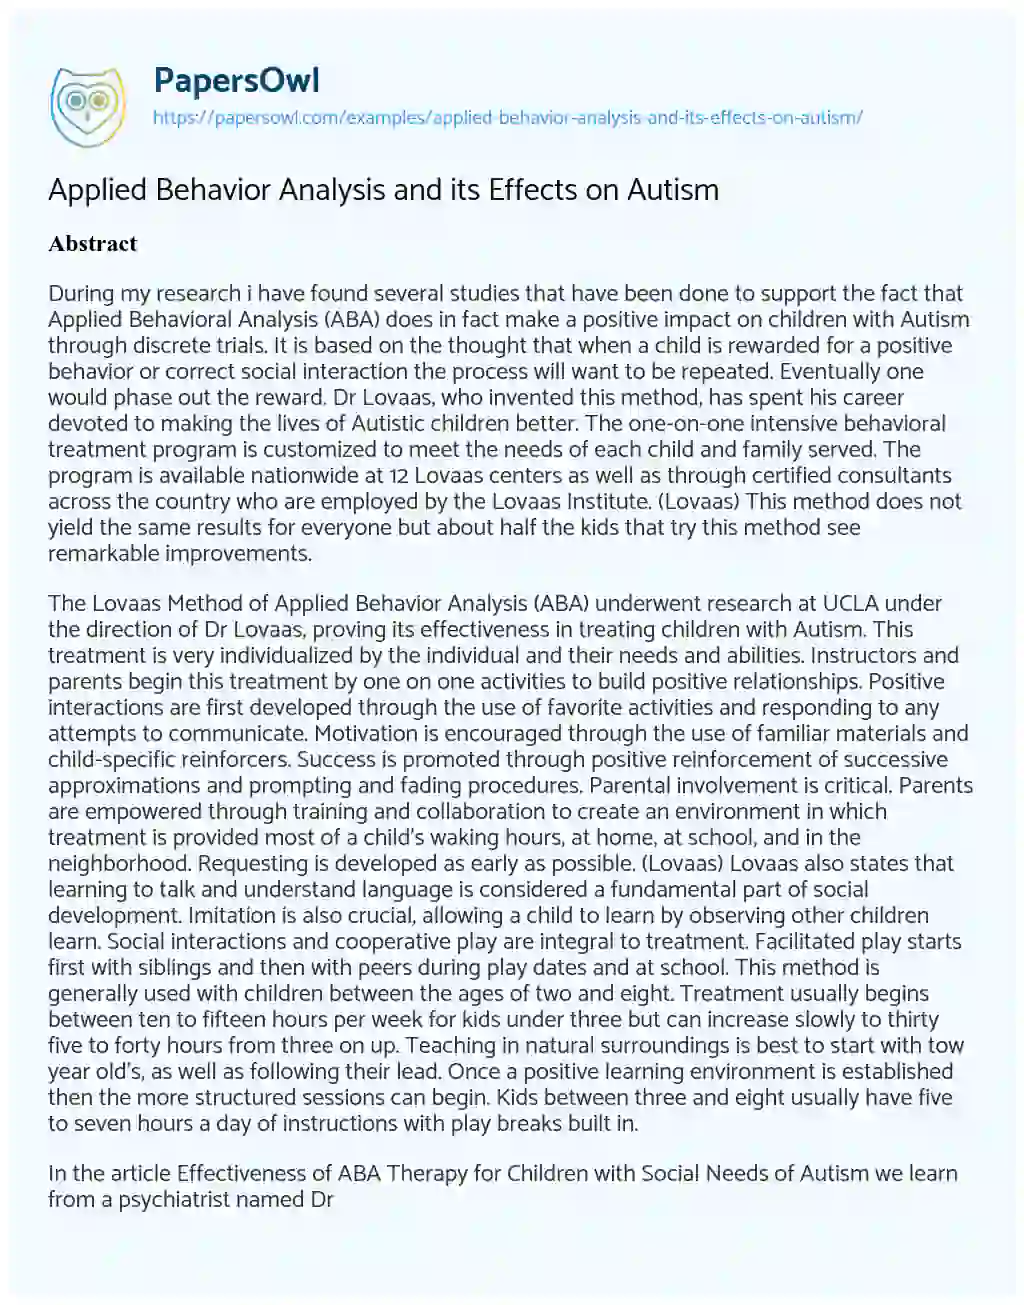 Essay on Applied Behavior Analysis and its Effects on Autism